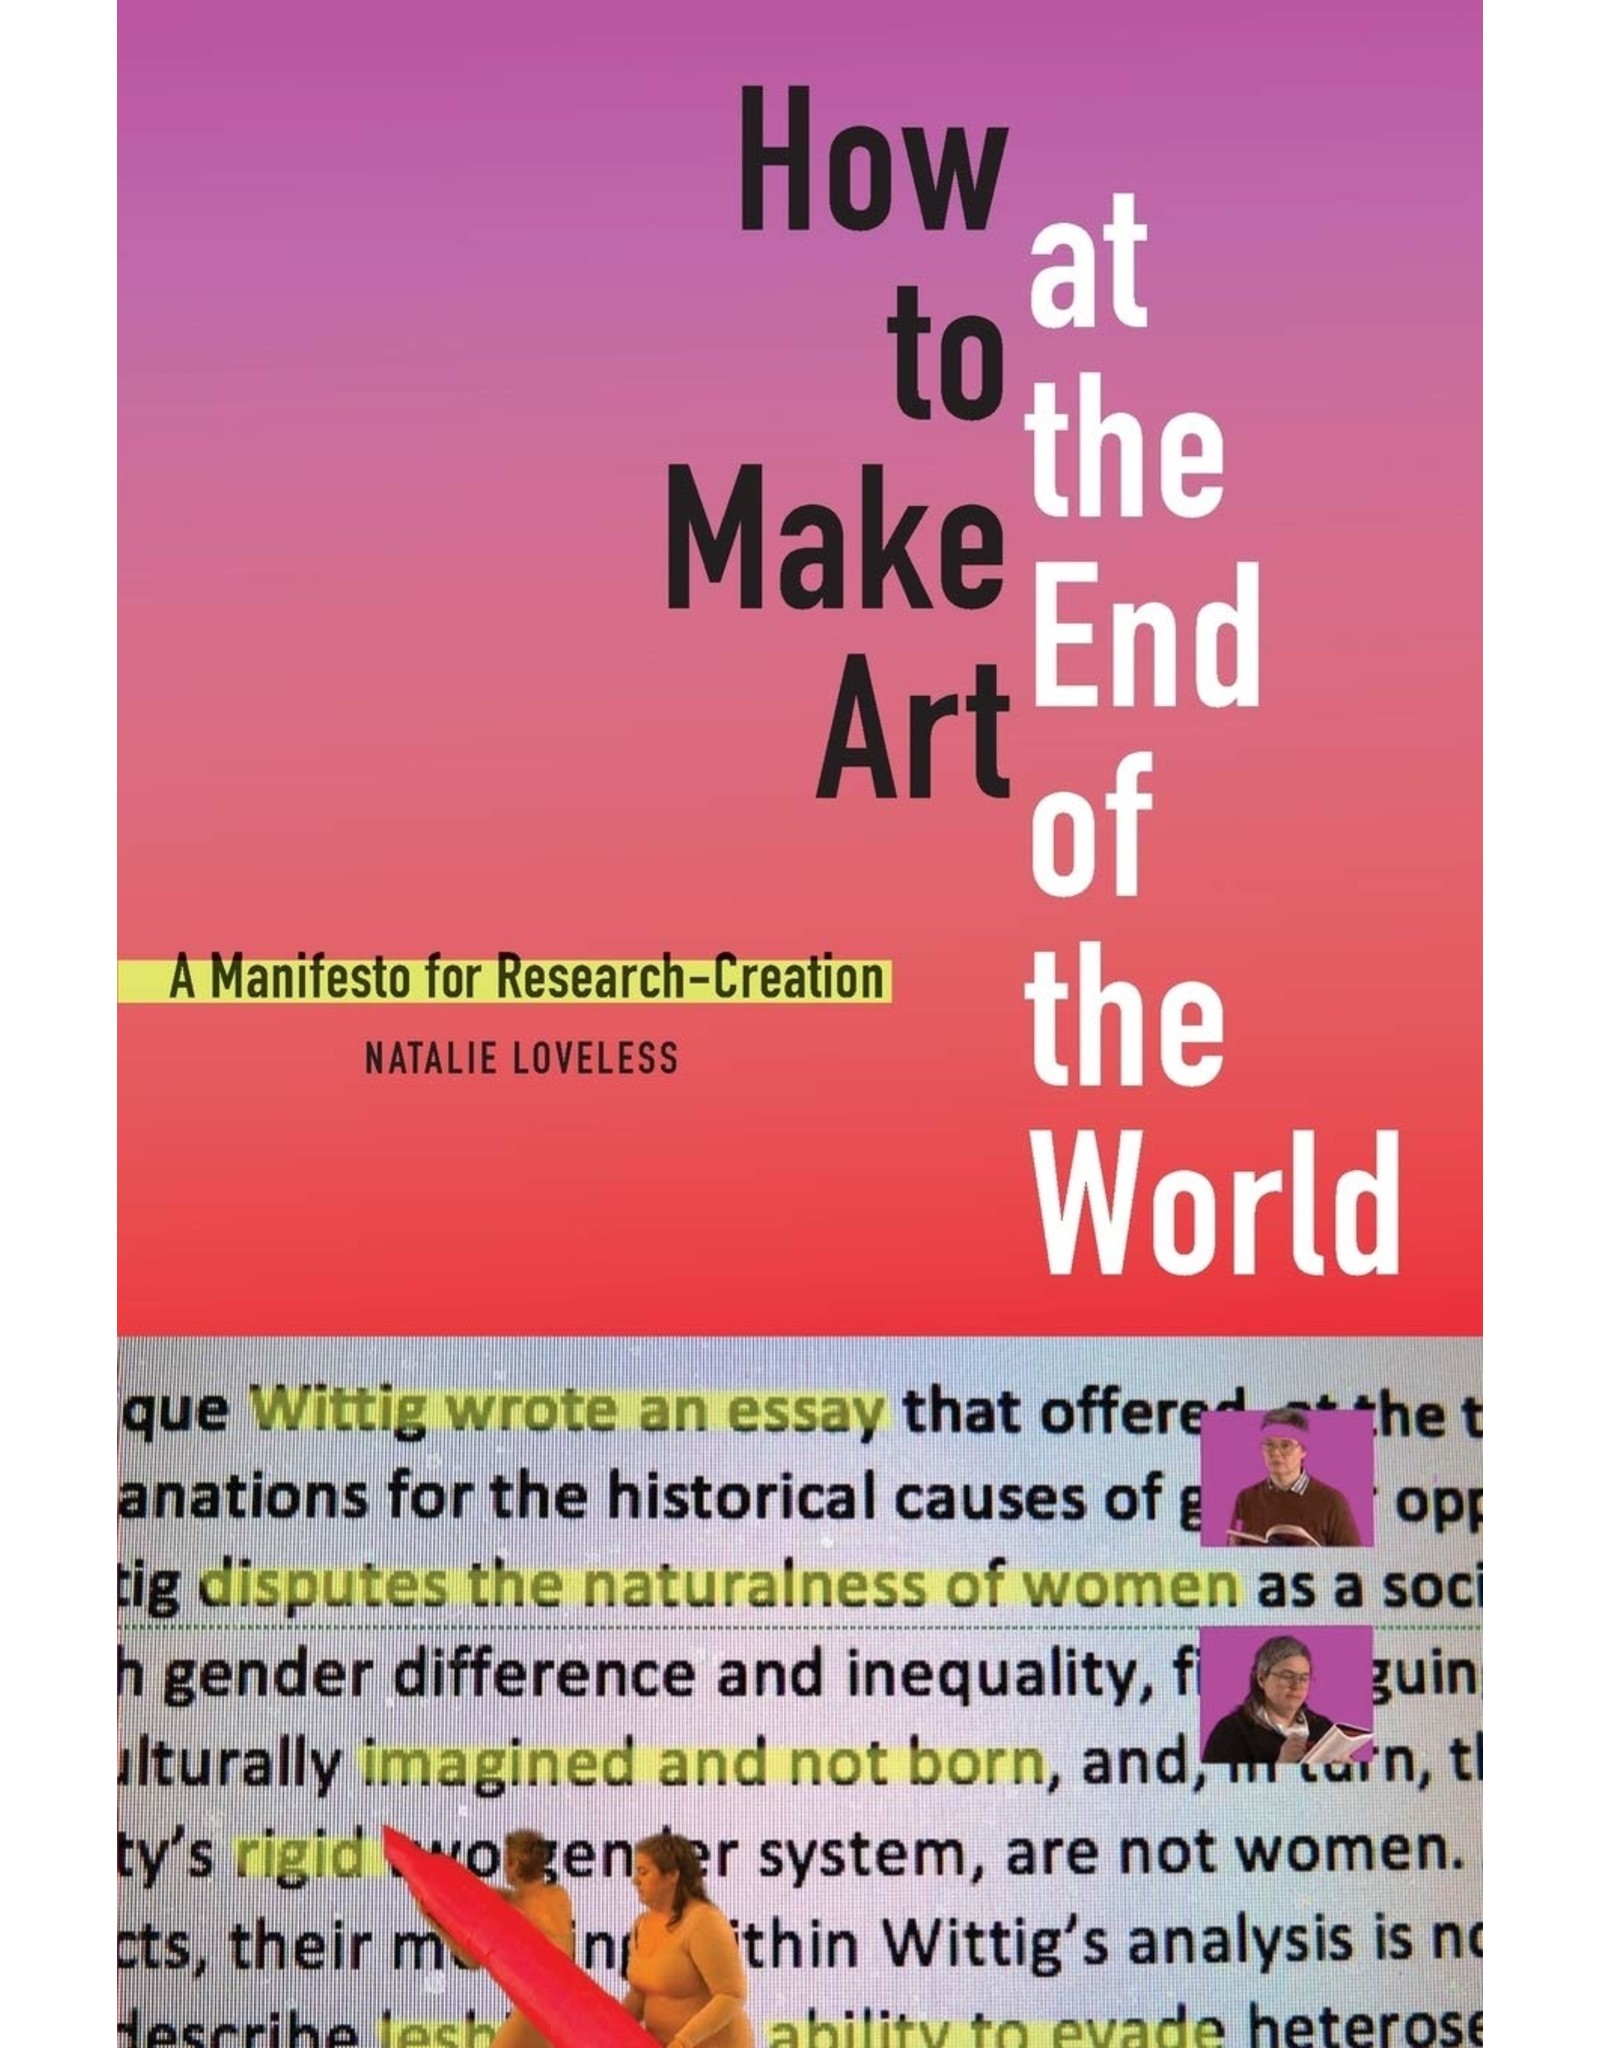 Literature How to Make Art at the End of the World: a Manifesto for Research-Creation